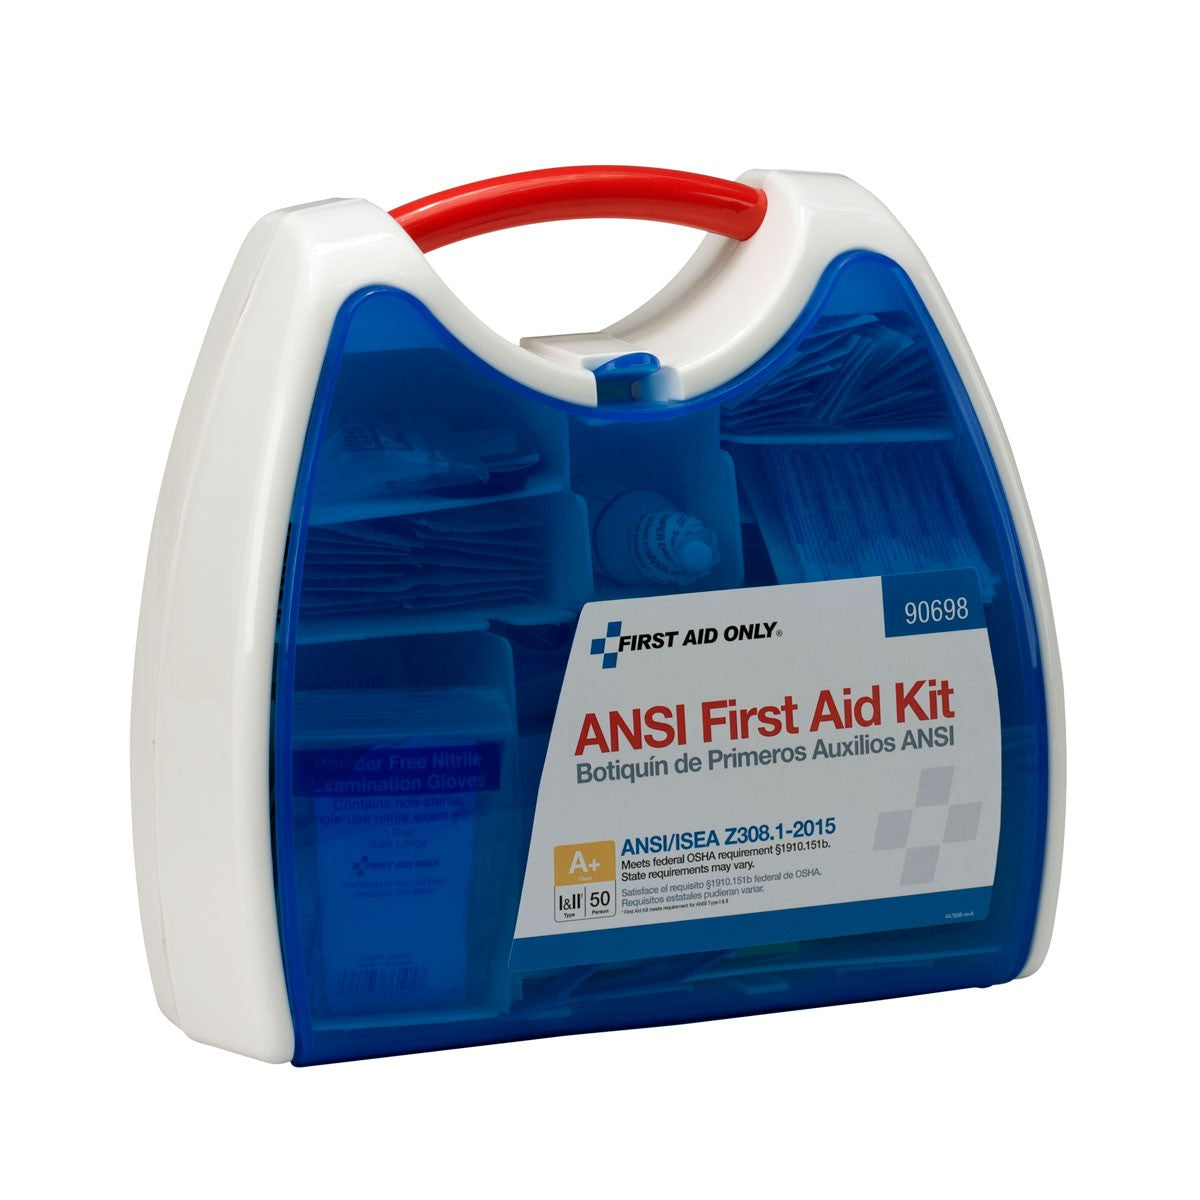 50 Person ReadyCare ANSI A+ Compliant Large First Aid Kit, Plastic Case - BS-FAK-90698-1-FM